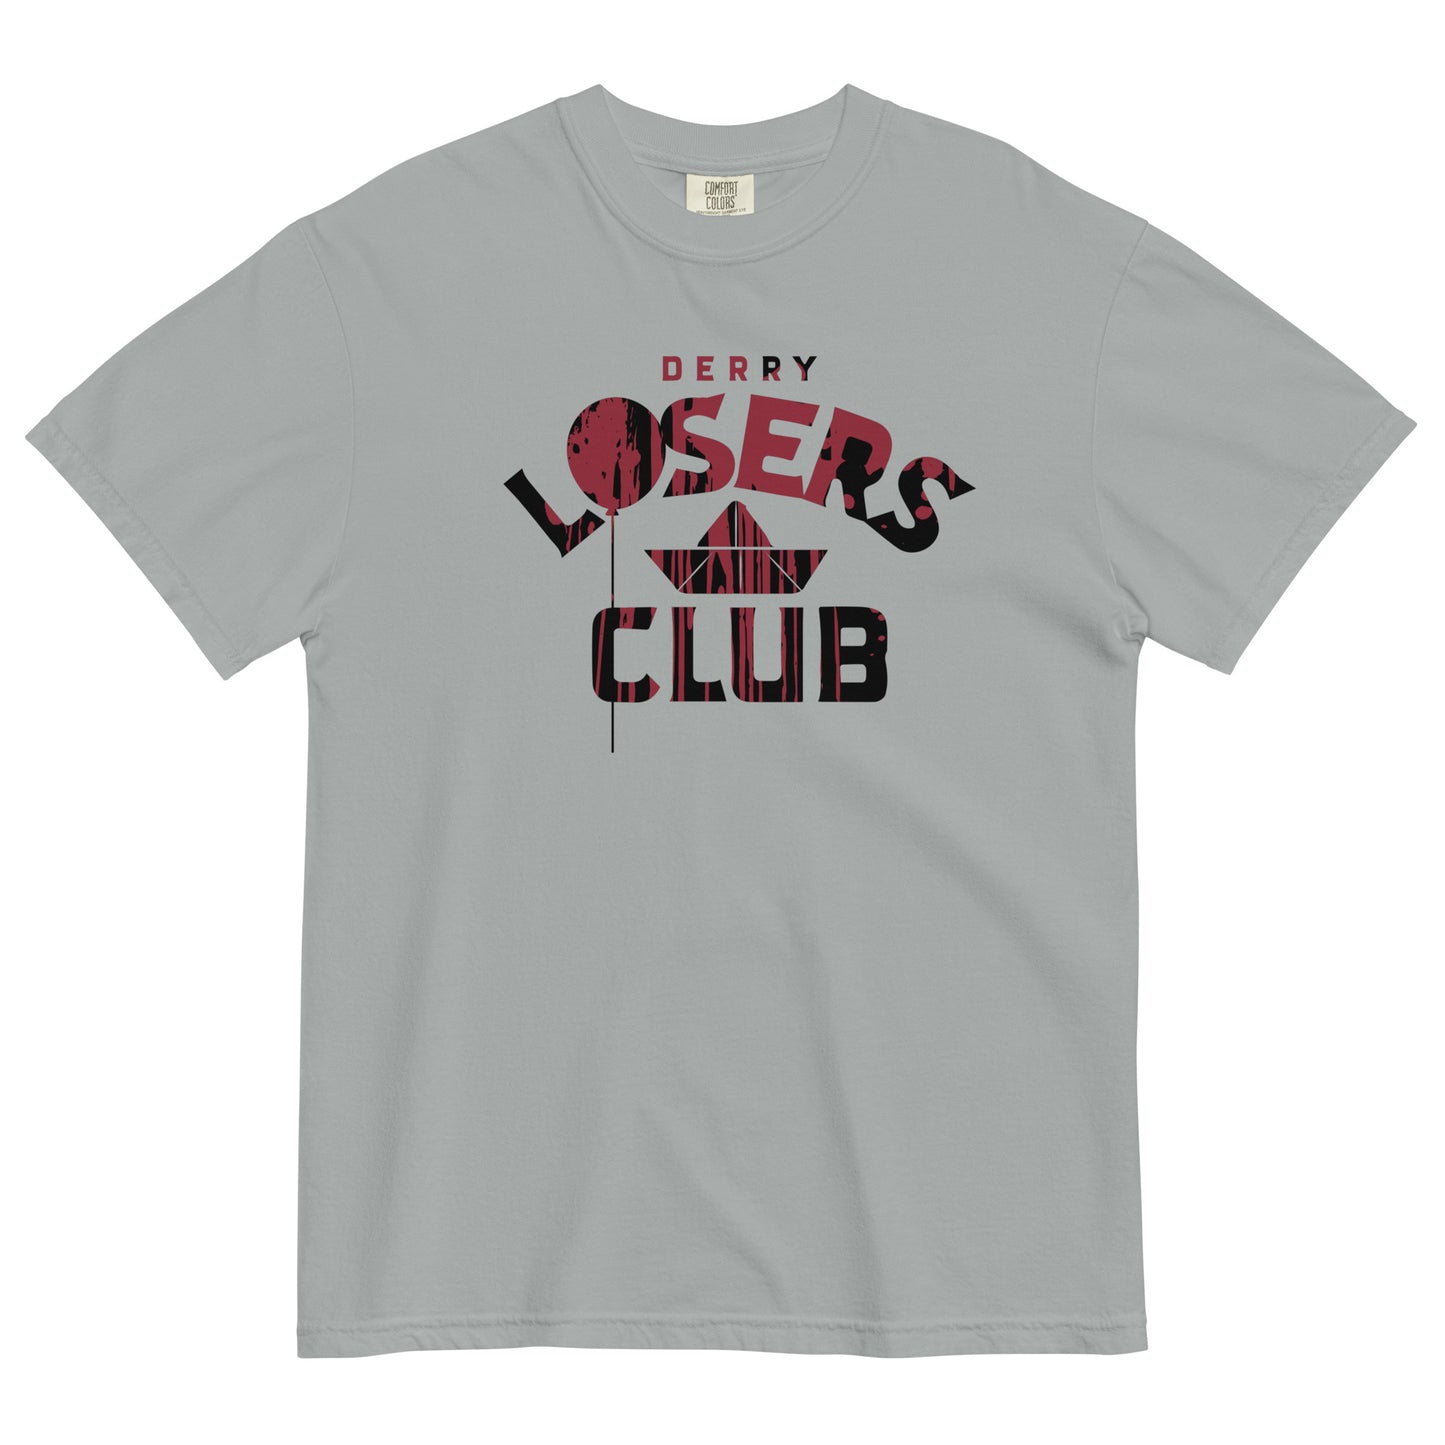 Derry Losers Club Men's Relaxed Fit Tee